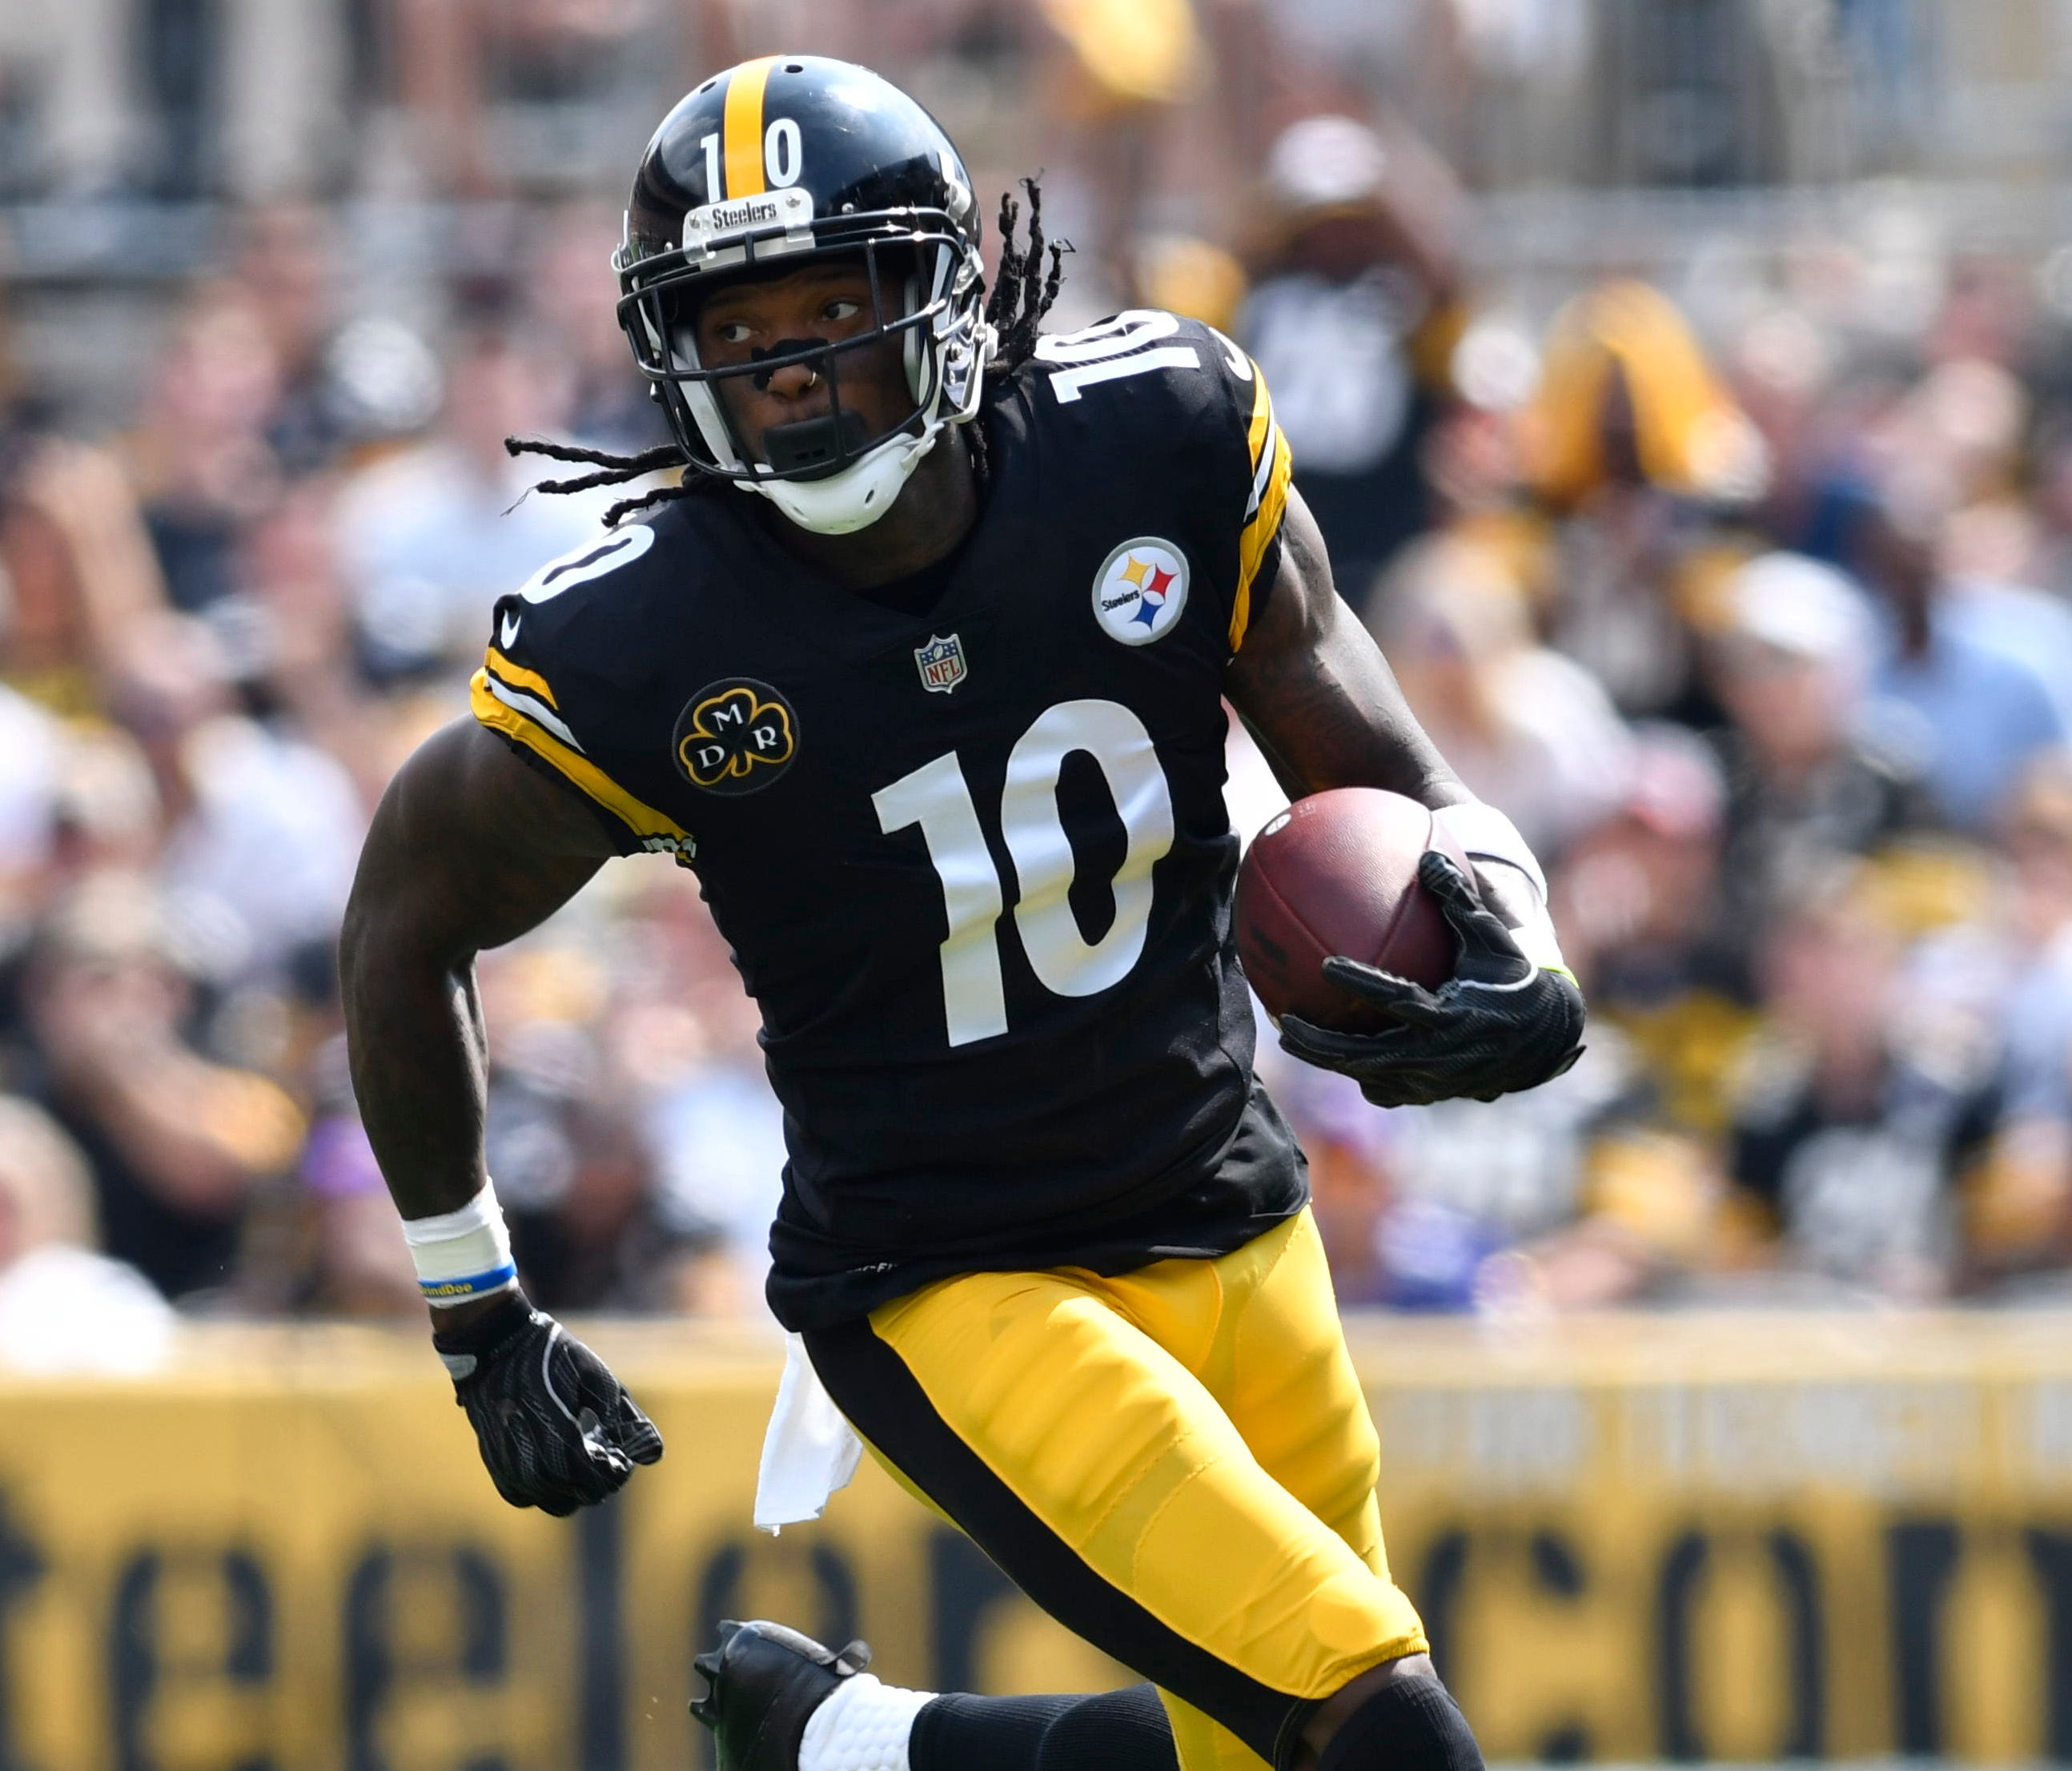 Pittsburgh Steelers wide receiver Martavis Bryant (10) runs with the ball after catching a pass during the first quarter of a game against the Minnesota Vikings at Heinz Field.